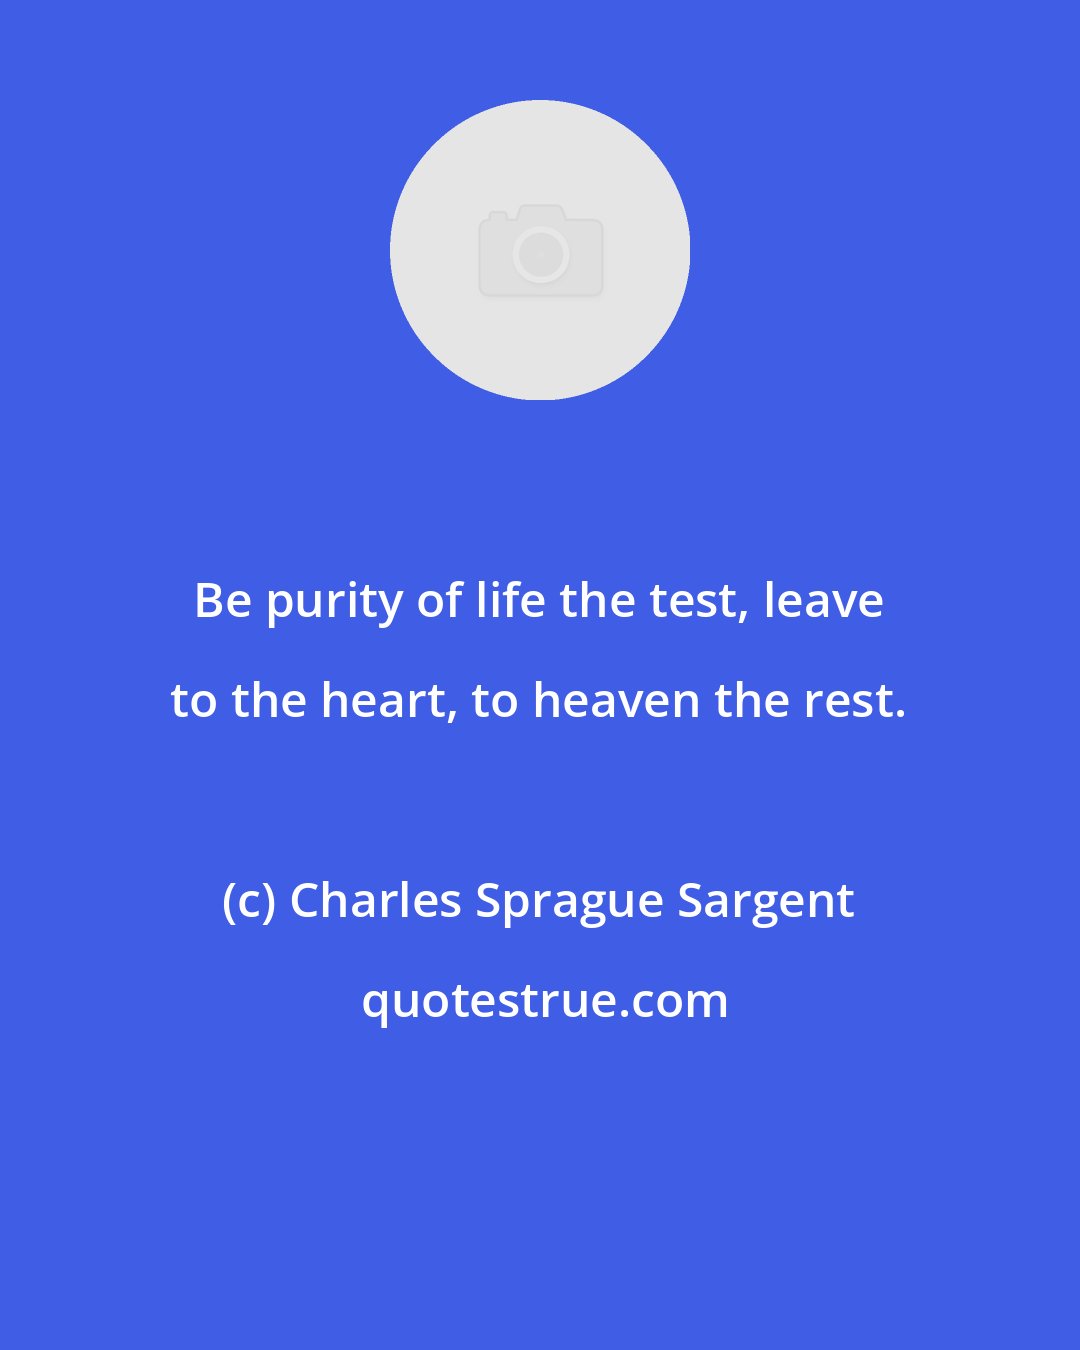 Charles Sprague Sargent: Be purity of life the test, leave to the heart, to heaven the rest.